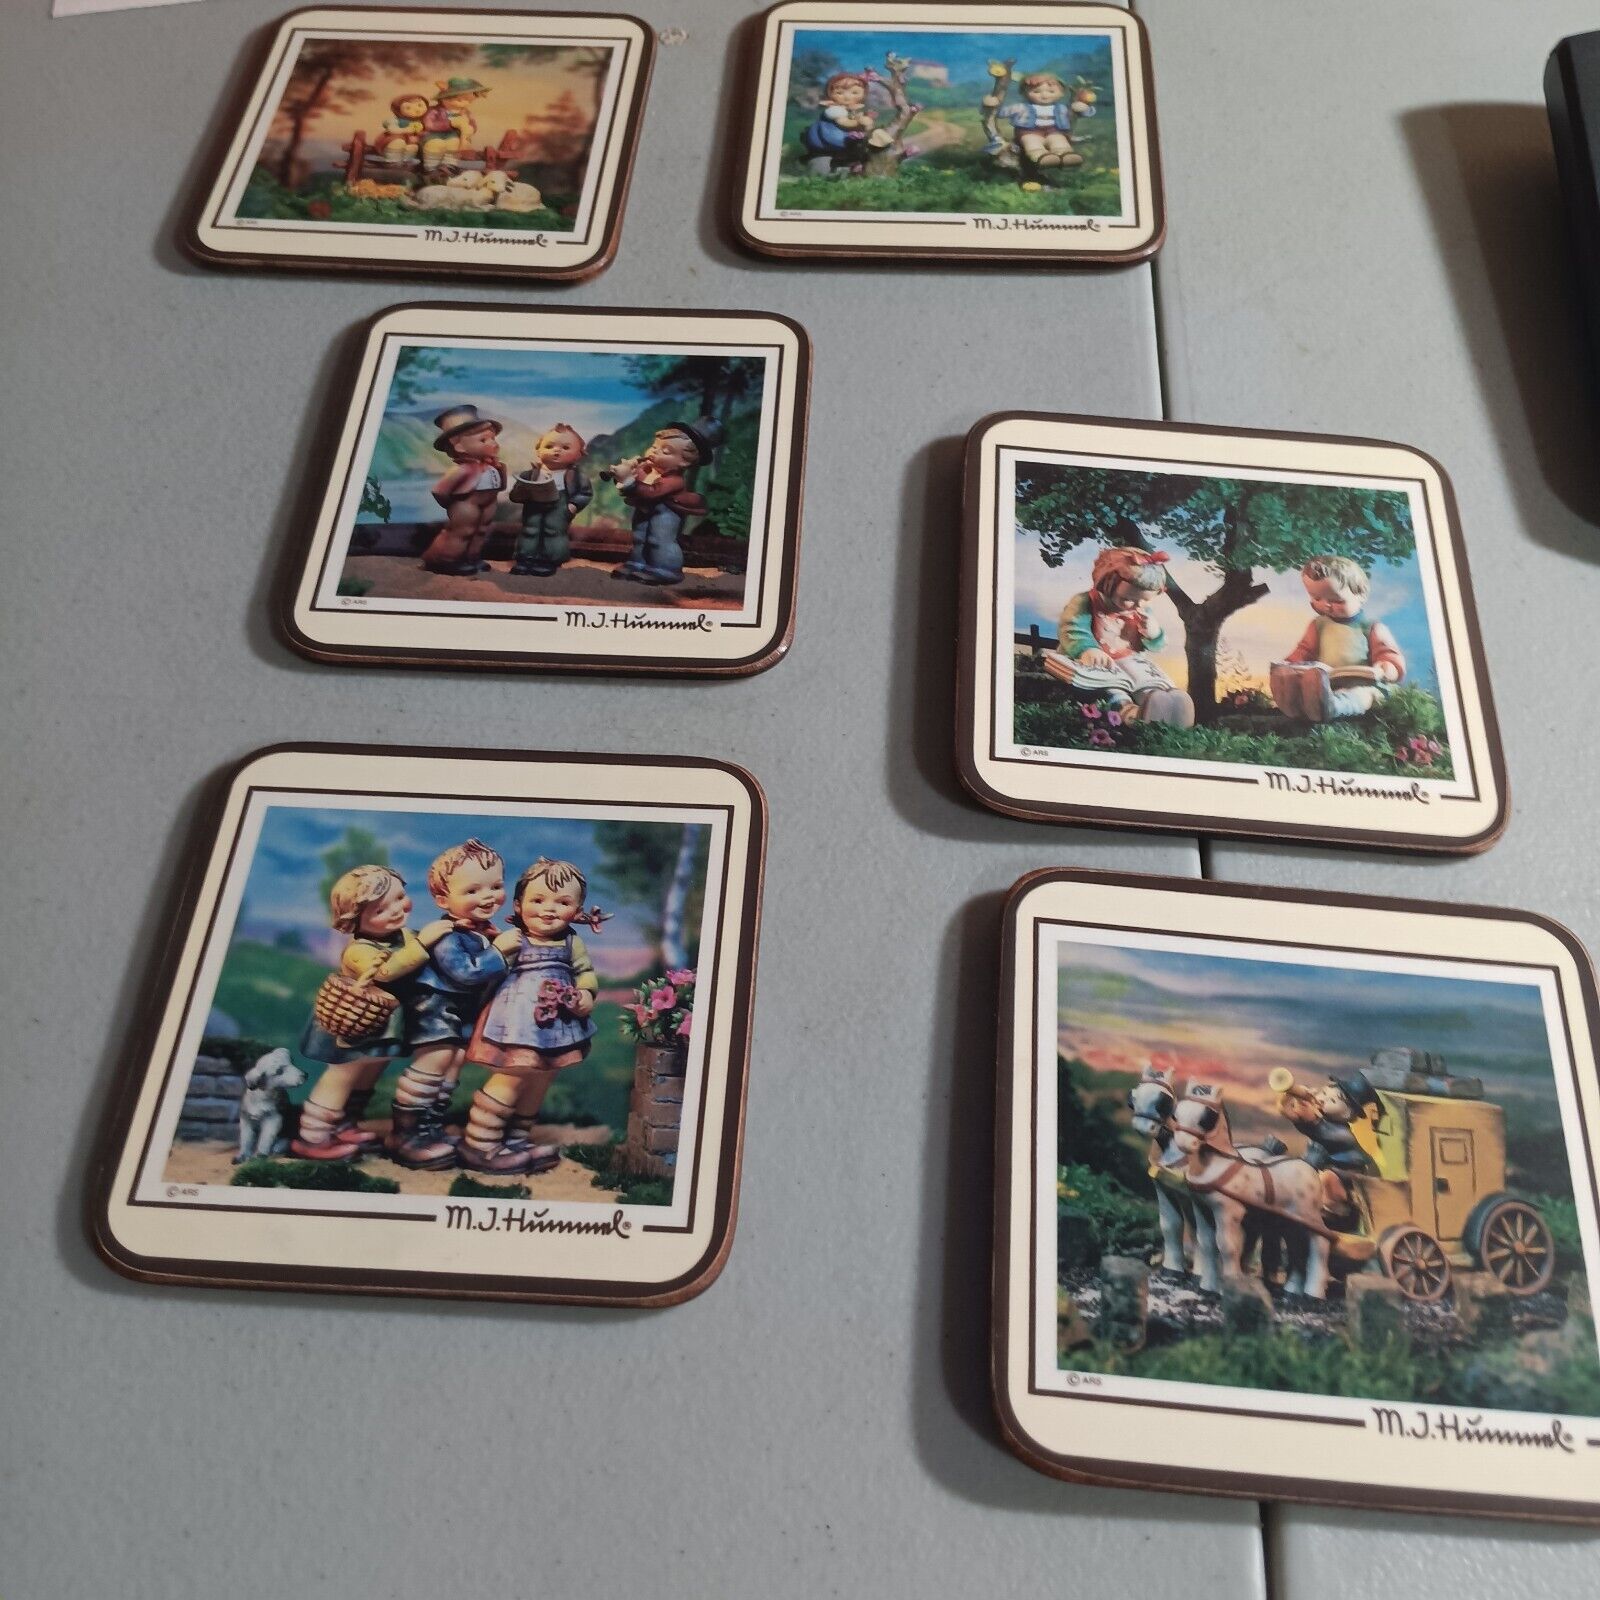 1986 Pimpernel Hummel Deluxe Coaster- set of 6 - made in England (P3)